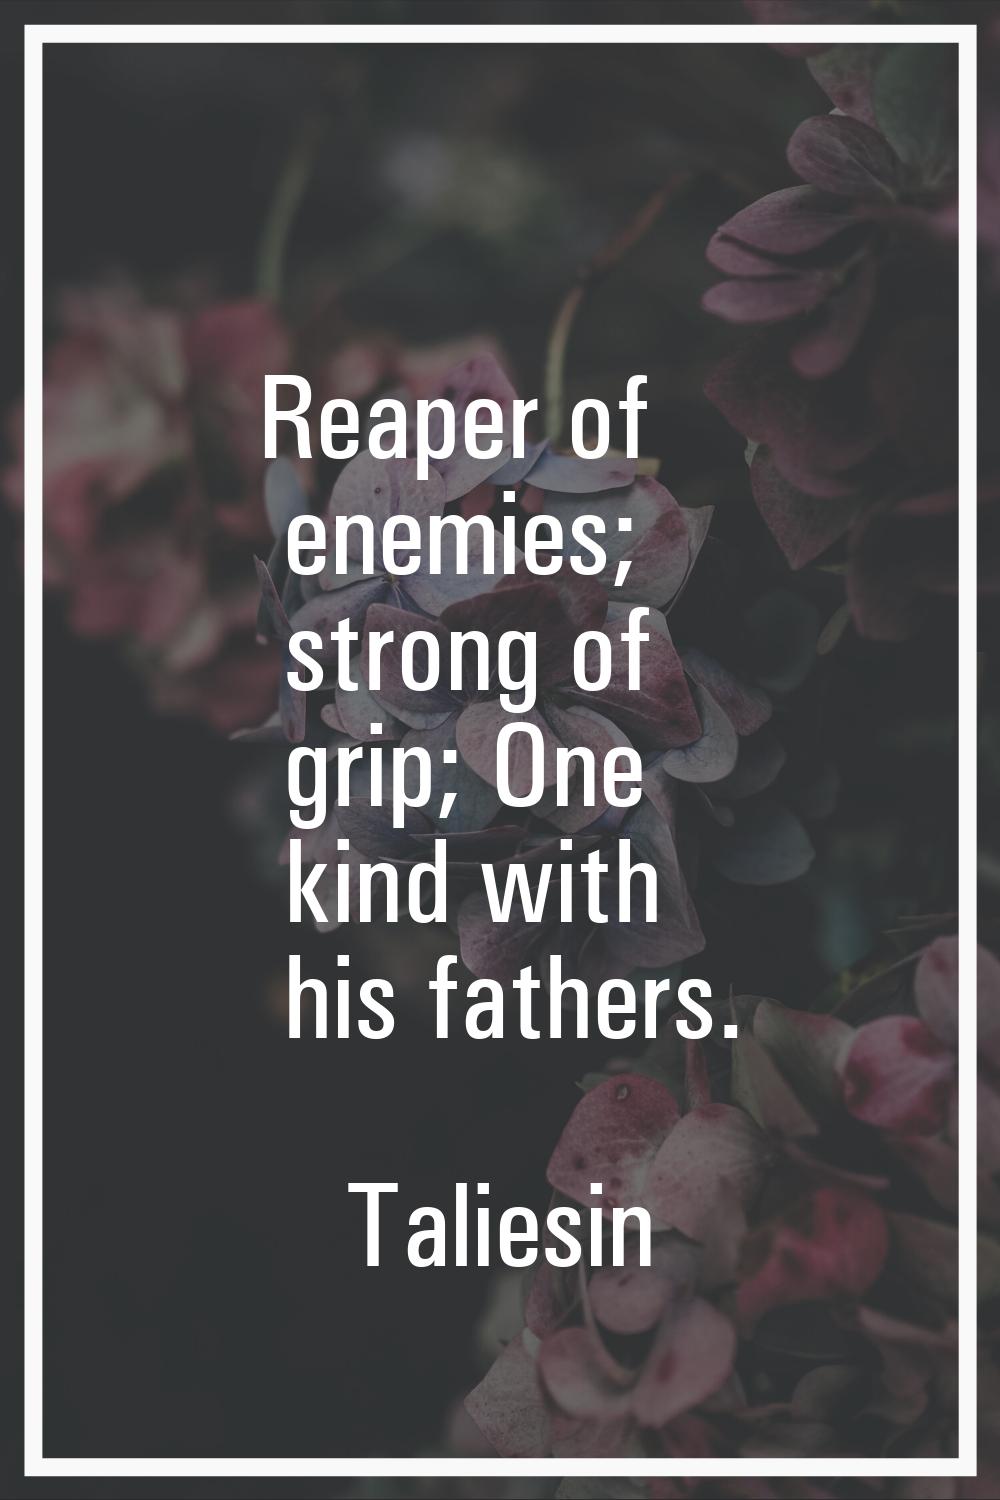 Reaper of enemies; strong of grip; One kind with his fathers.